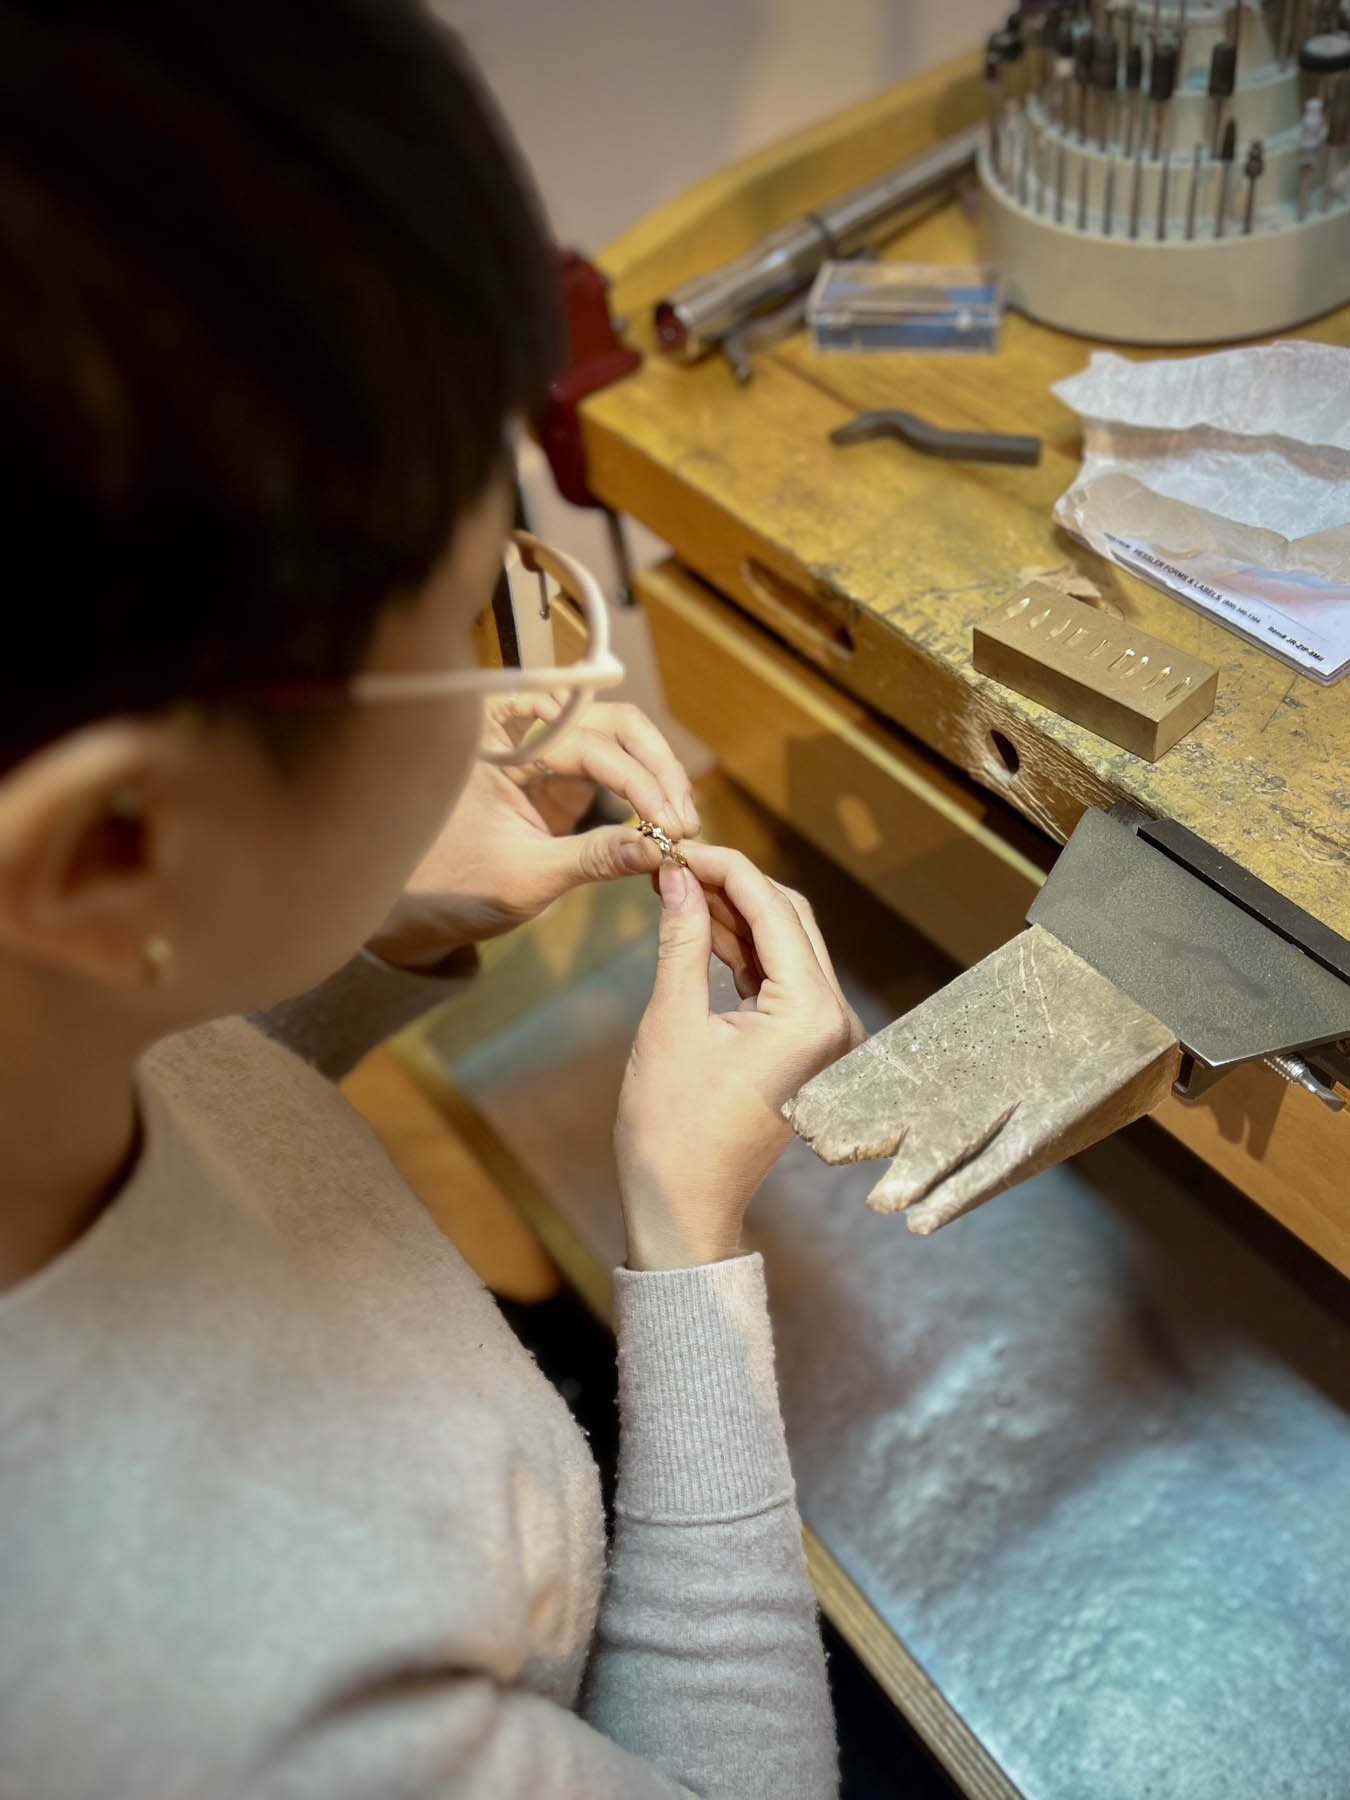 A person with glasses on sits at a workbench and crafts metal jewelry.